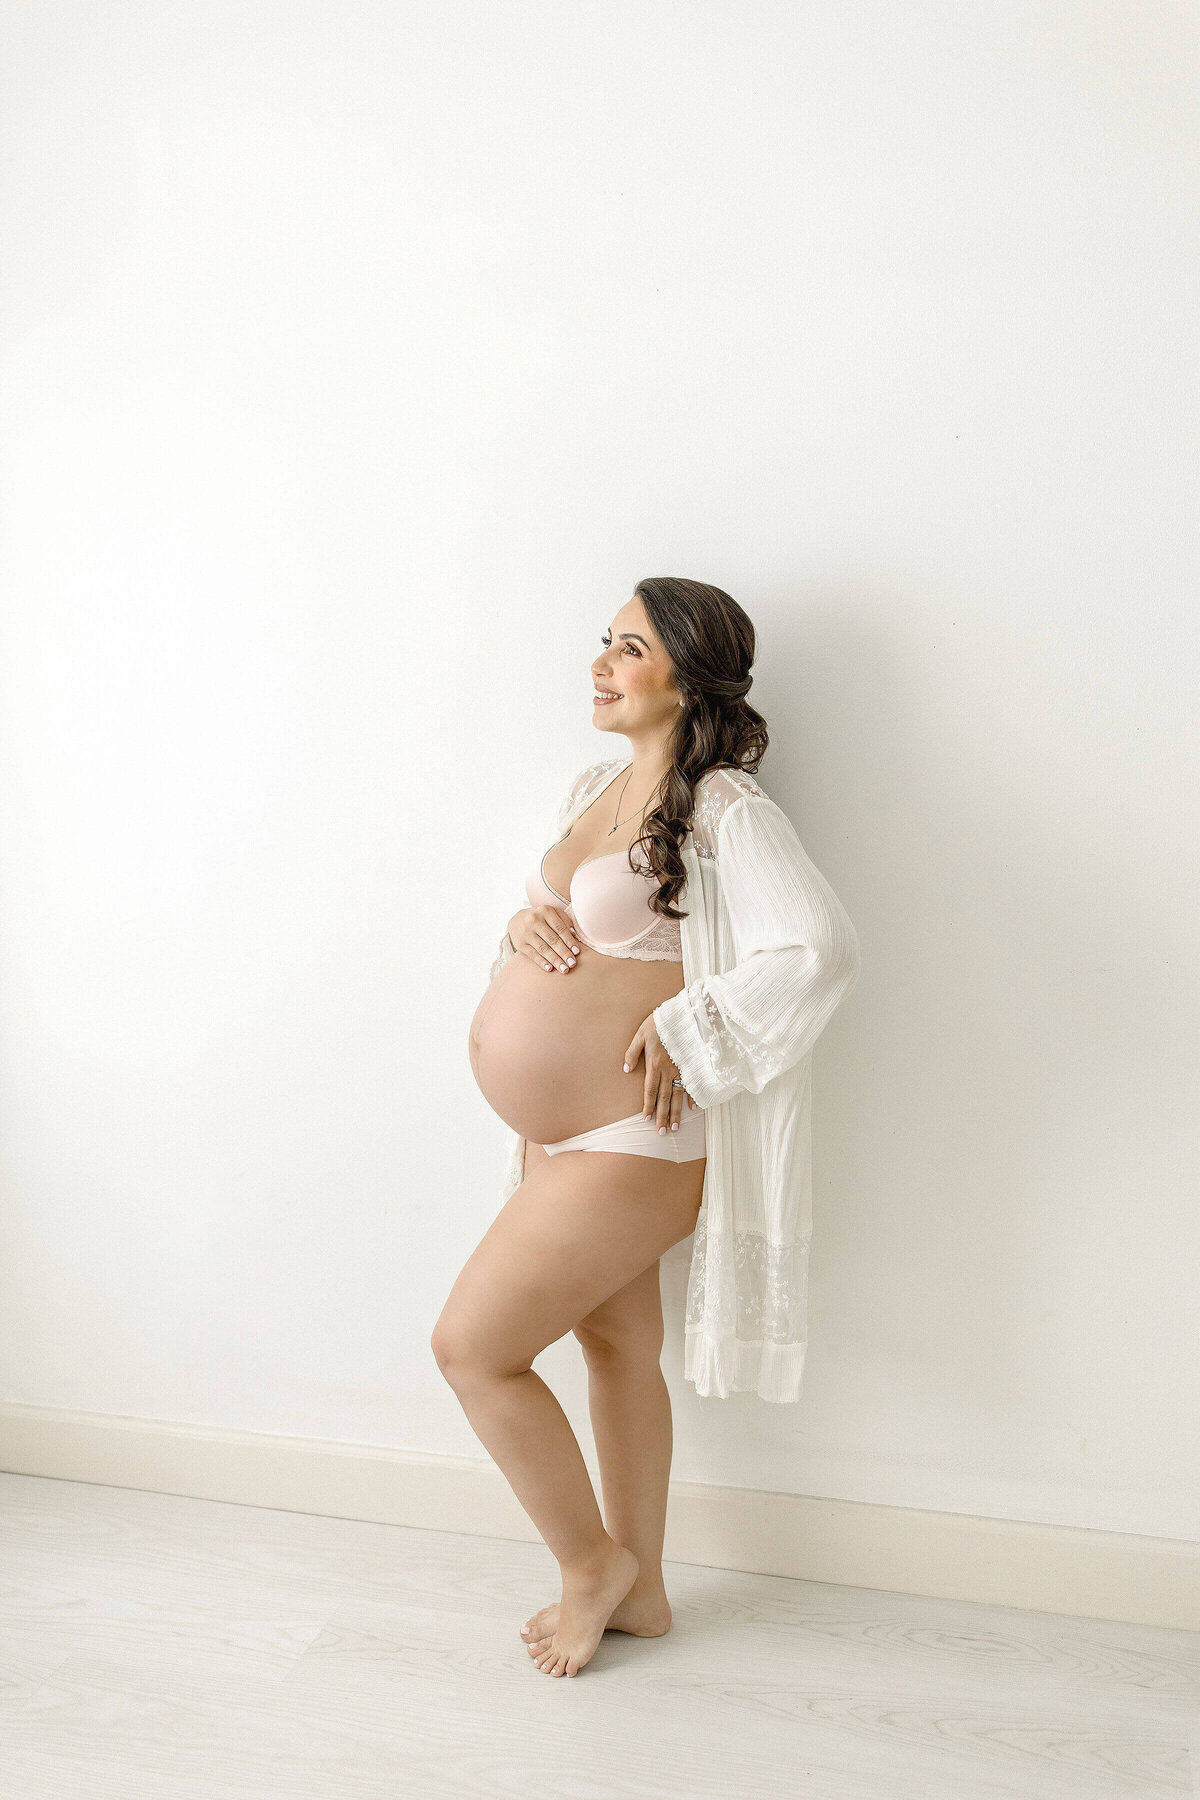 fort-lauderdale-maternity-photography_0009